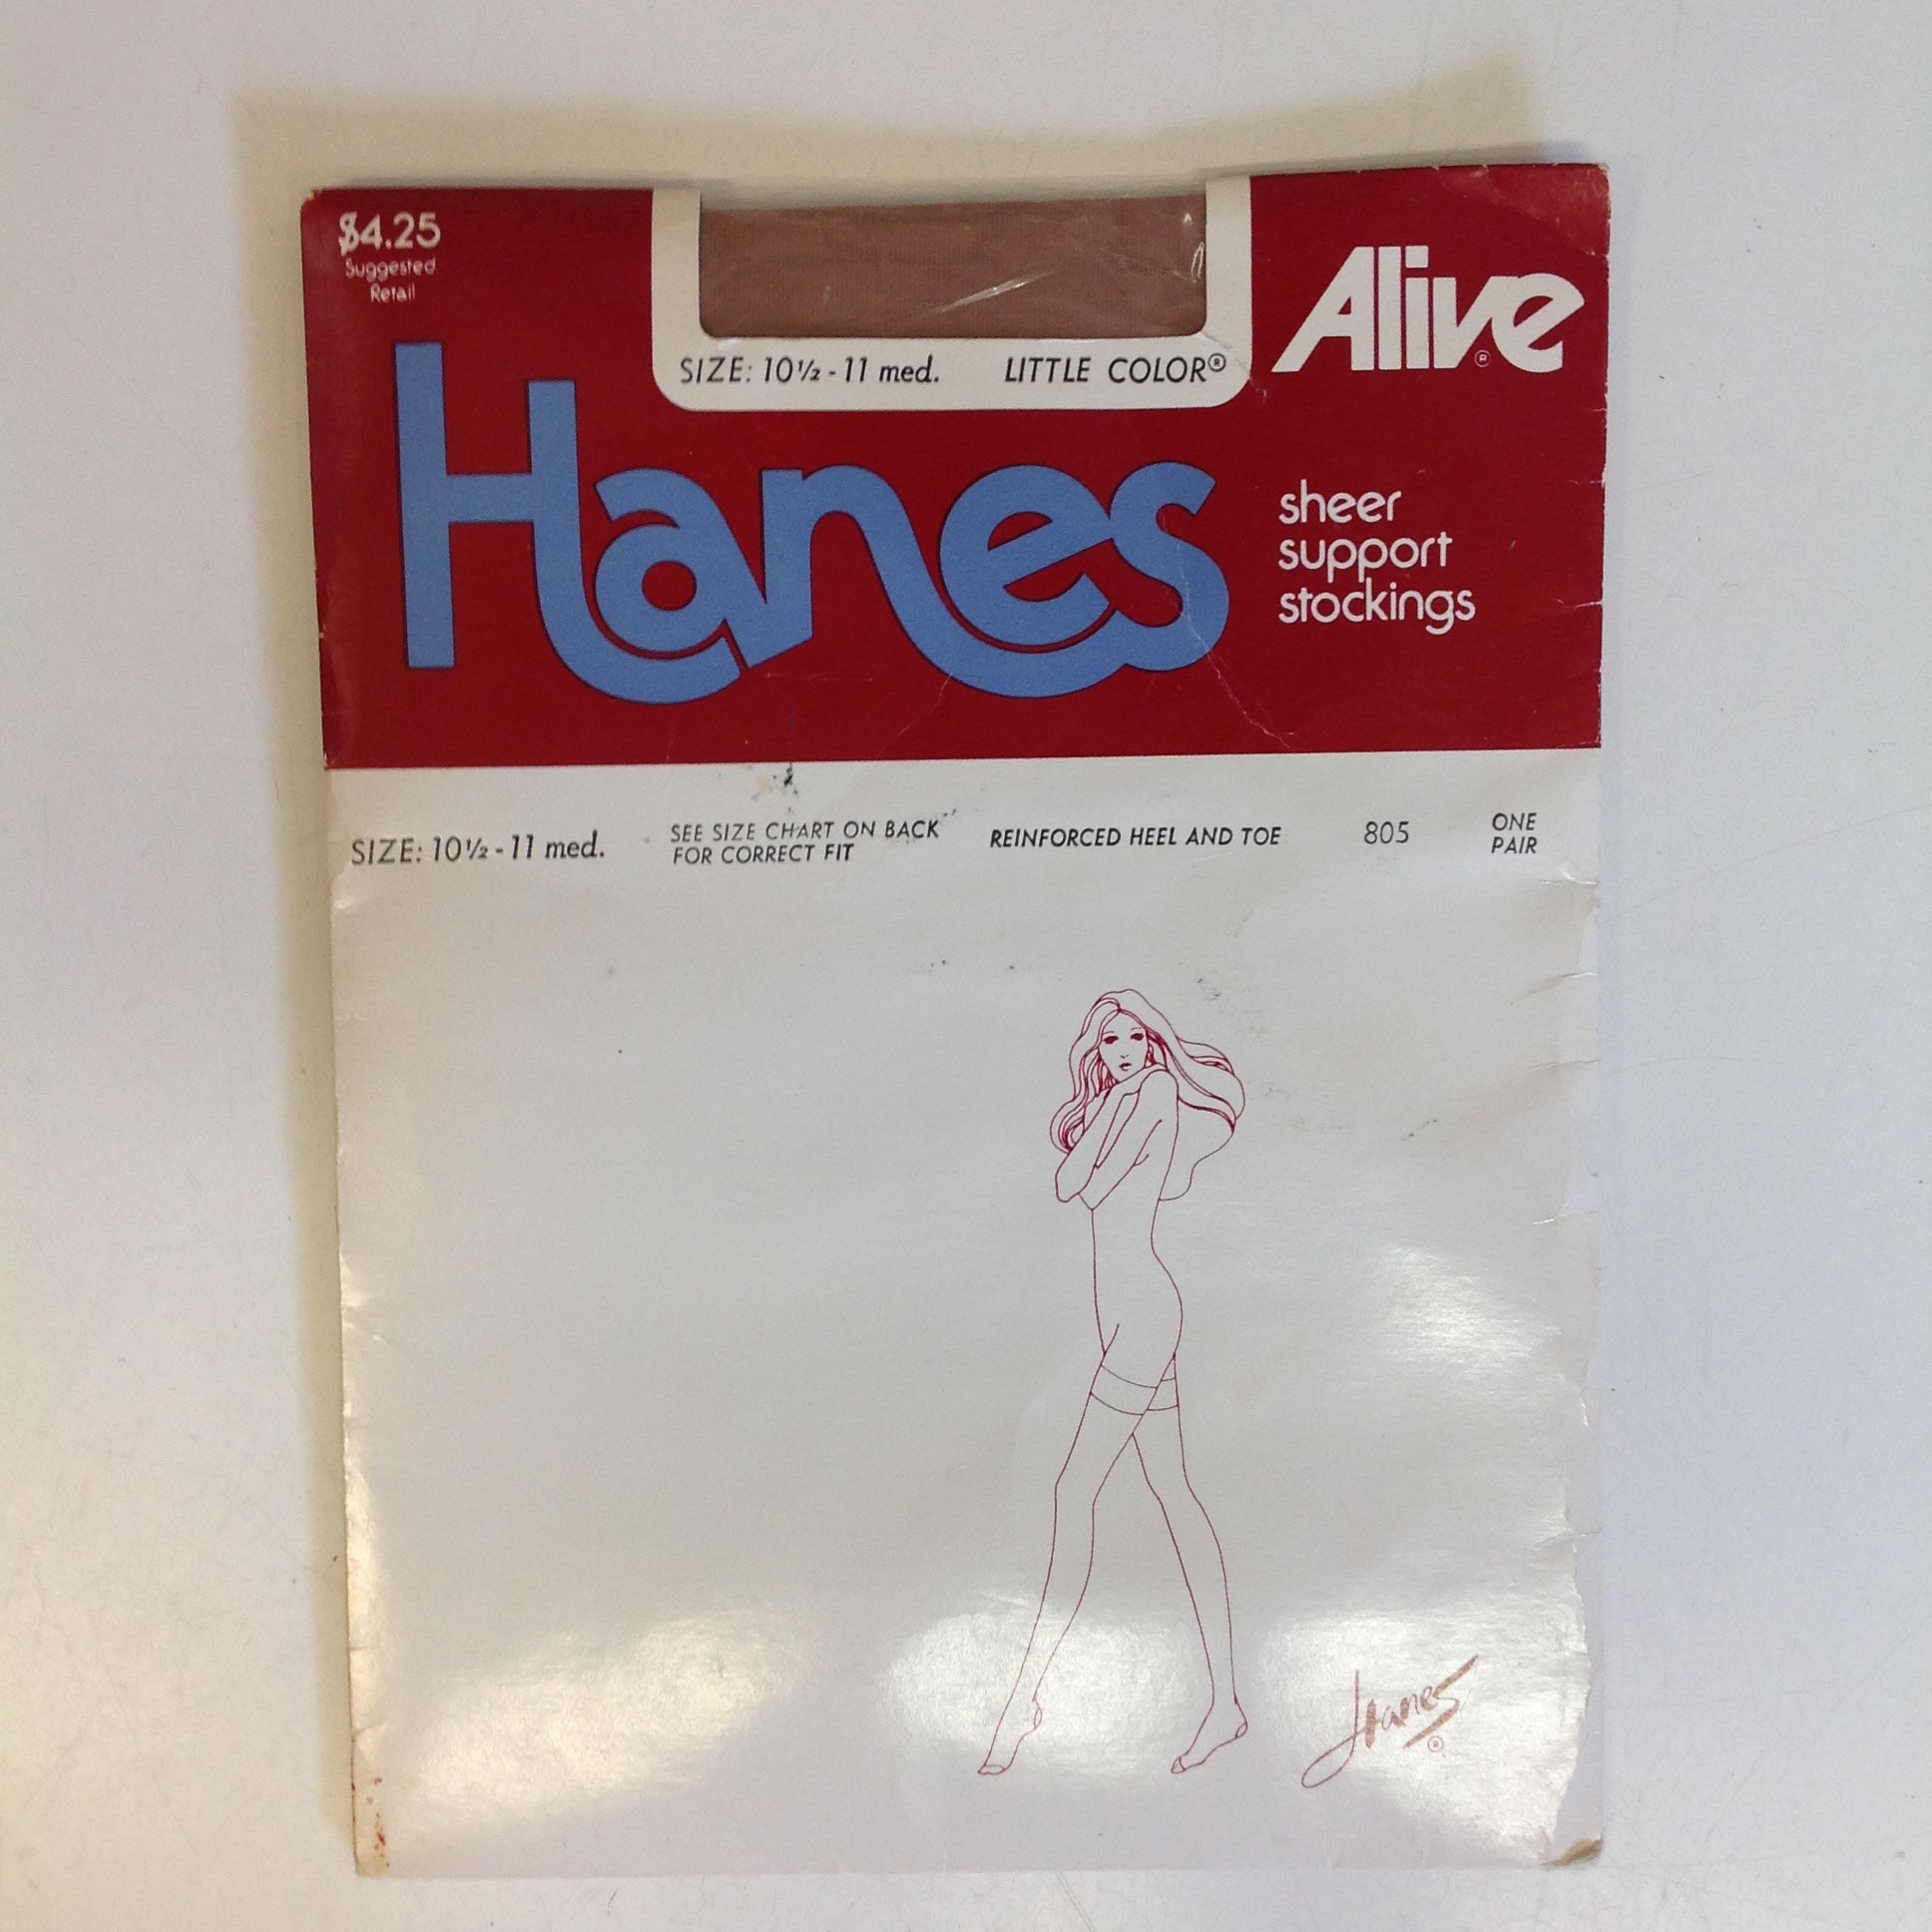 Vintage 1970's NOS Hanes Alive Sheer Support Stockings Size 10 1/2